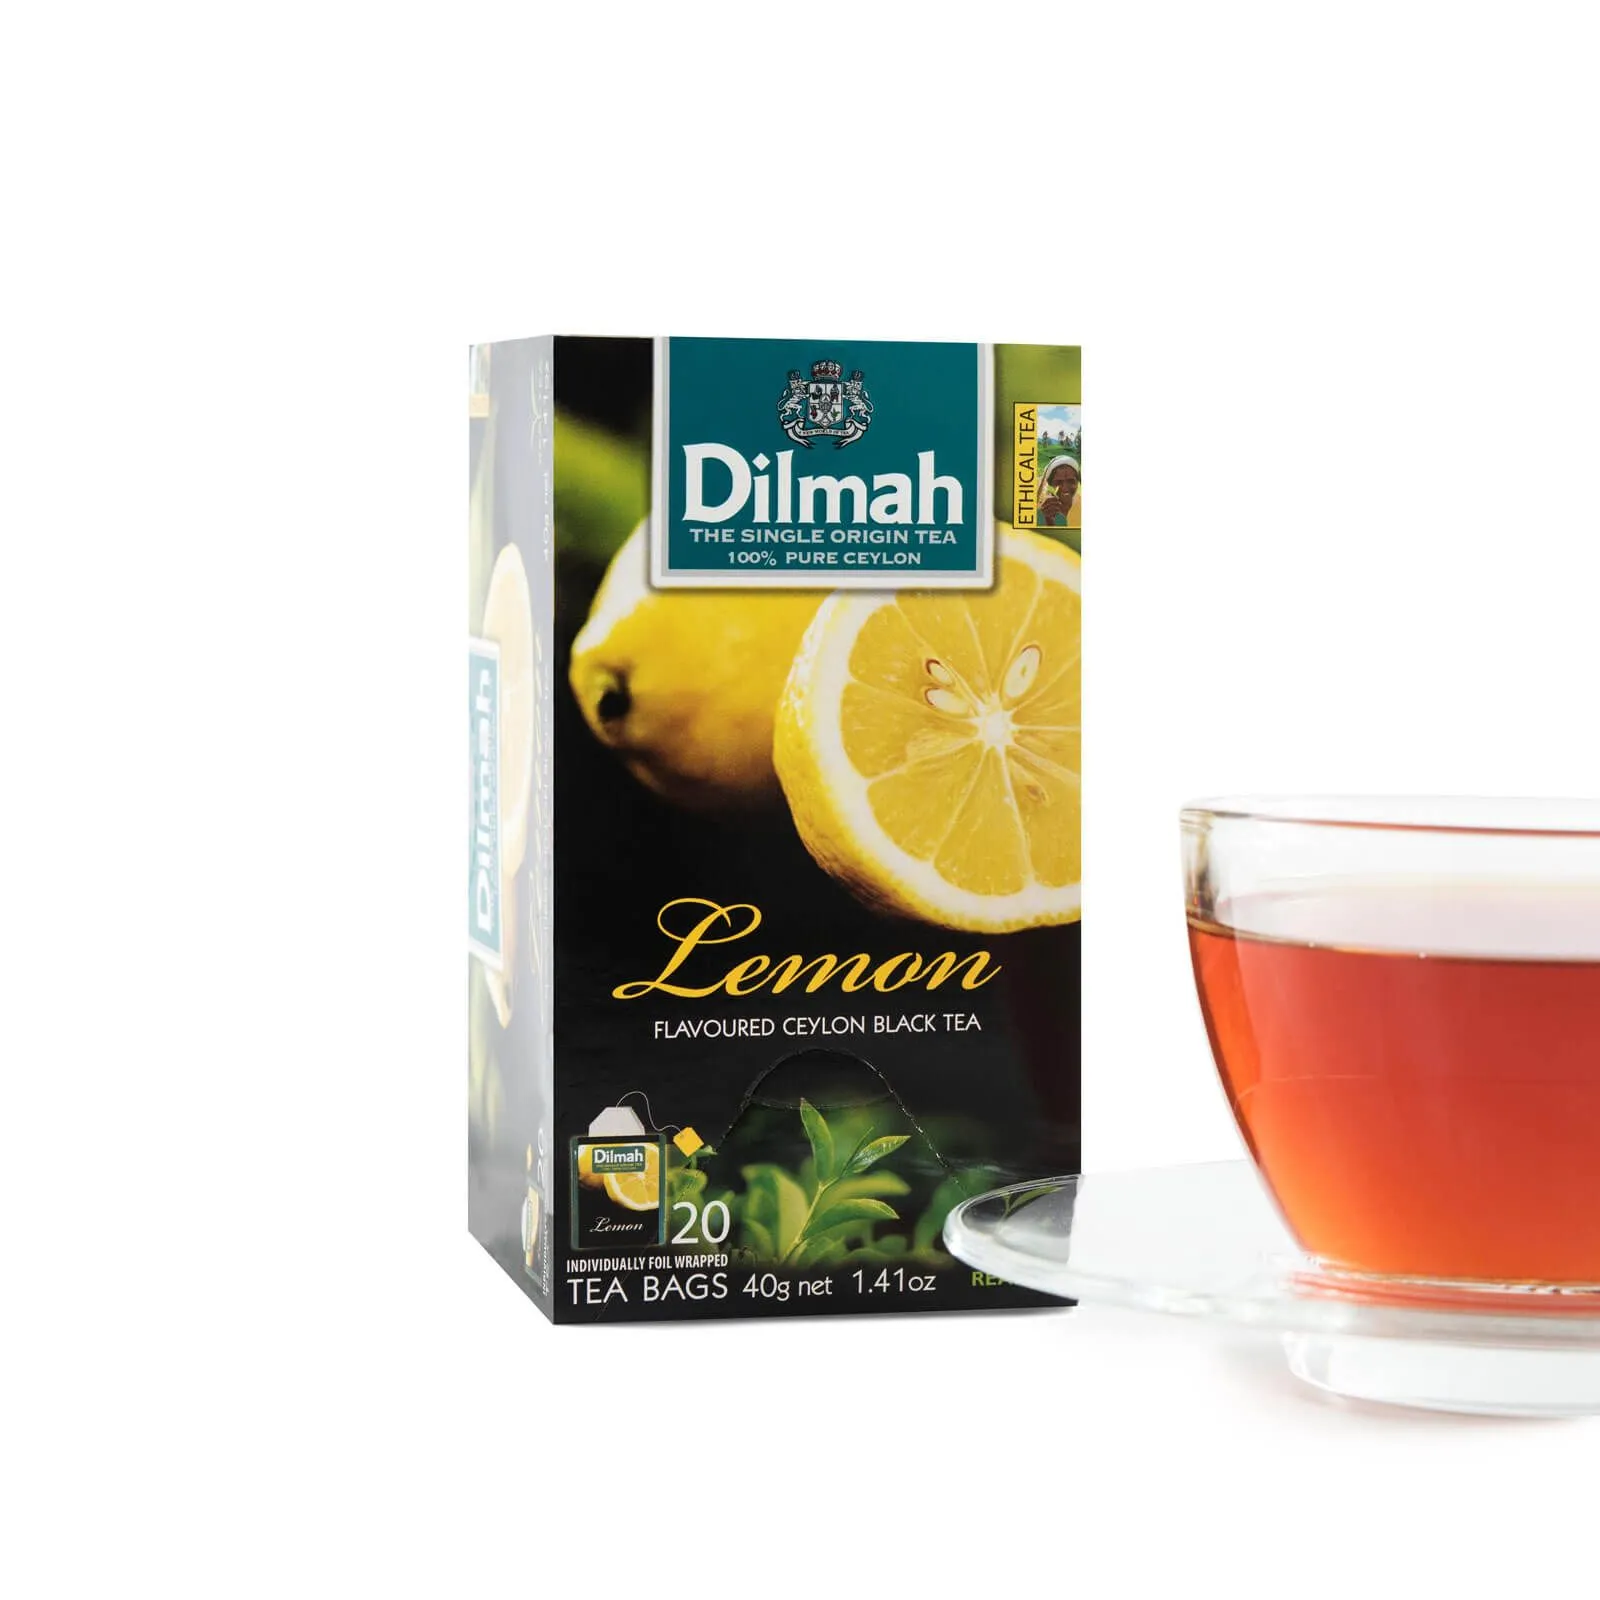 Pack of 20 individually wrapped tea bags of Lemon black tea and a cup of tea